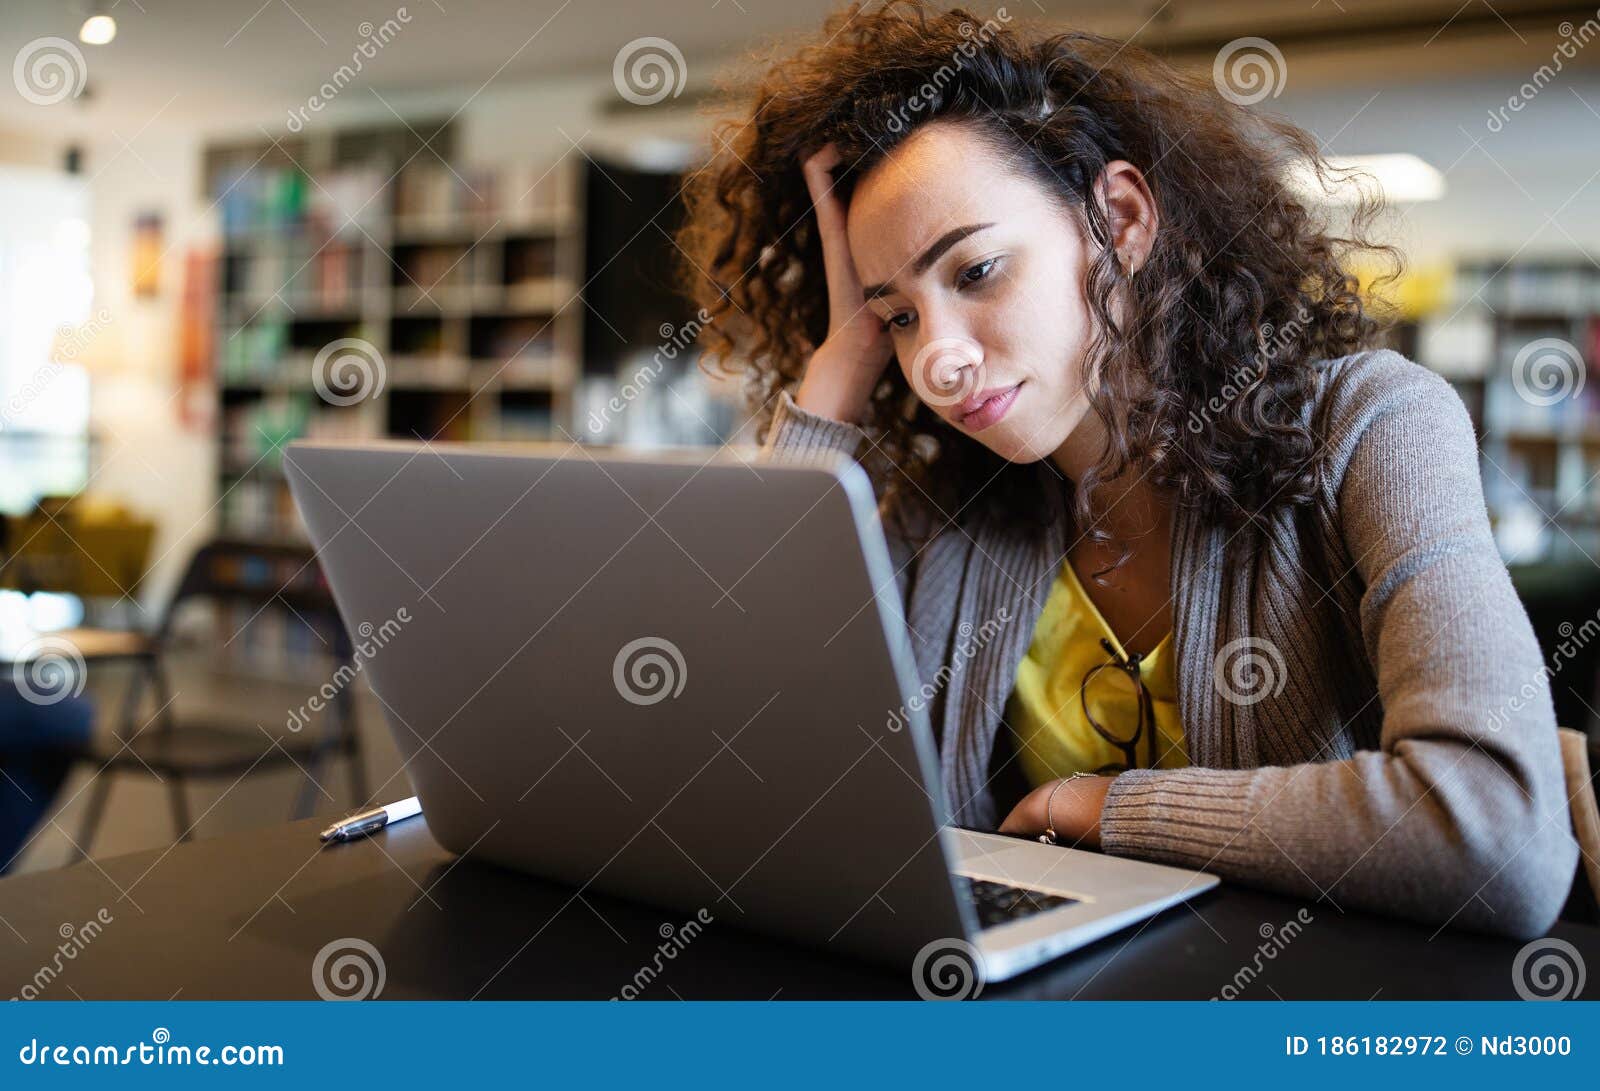 student woman finding it difficult at study and comprehend scool tasks